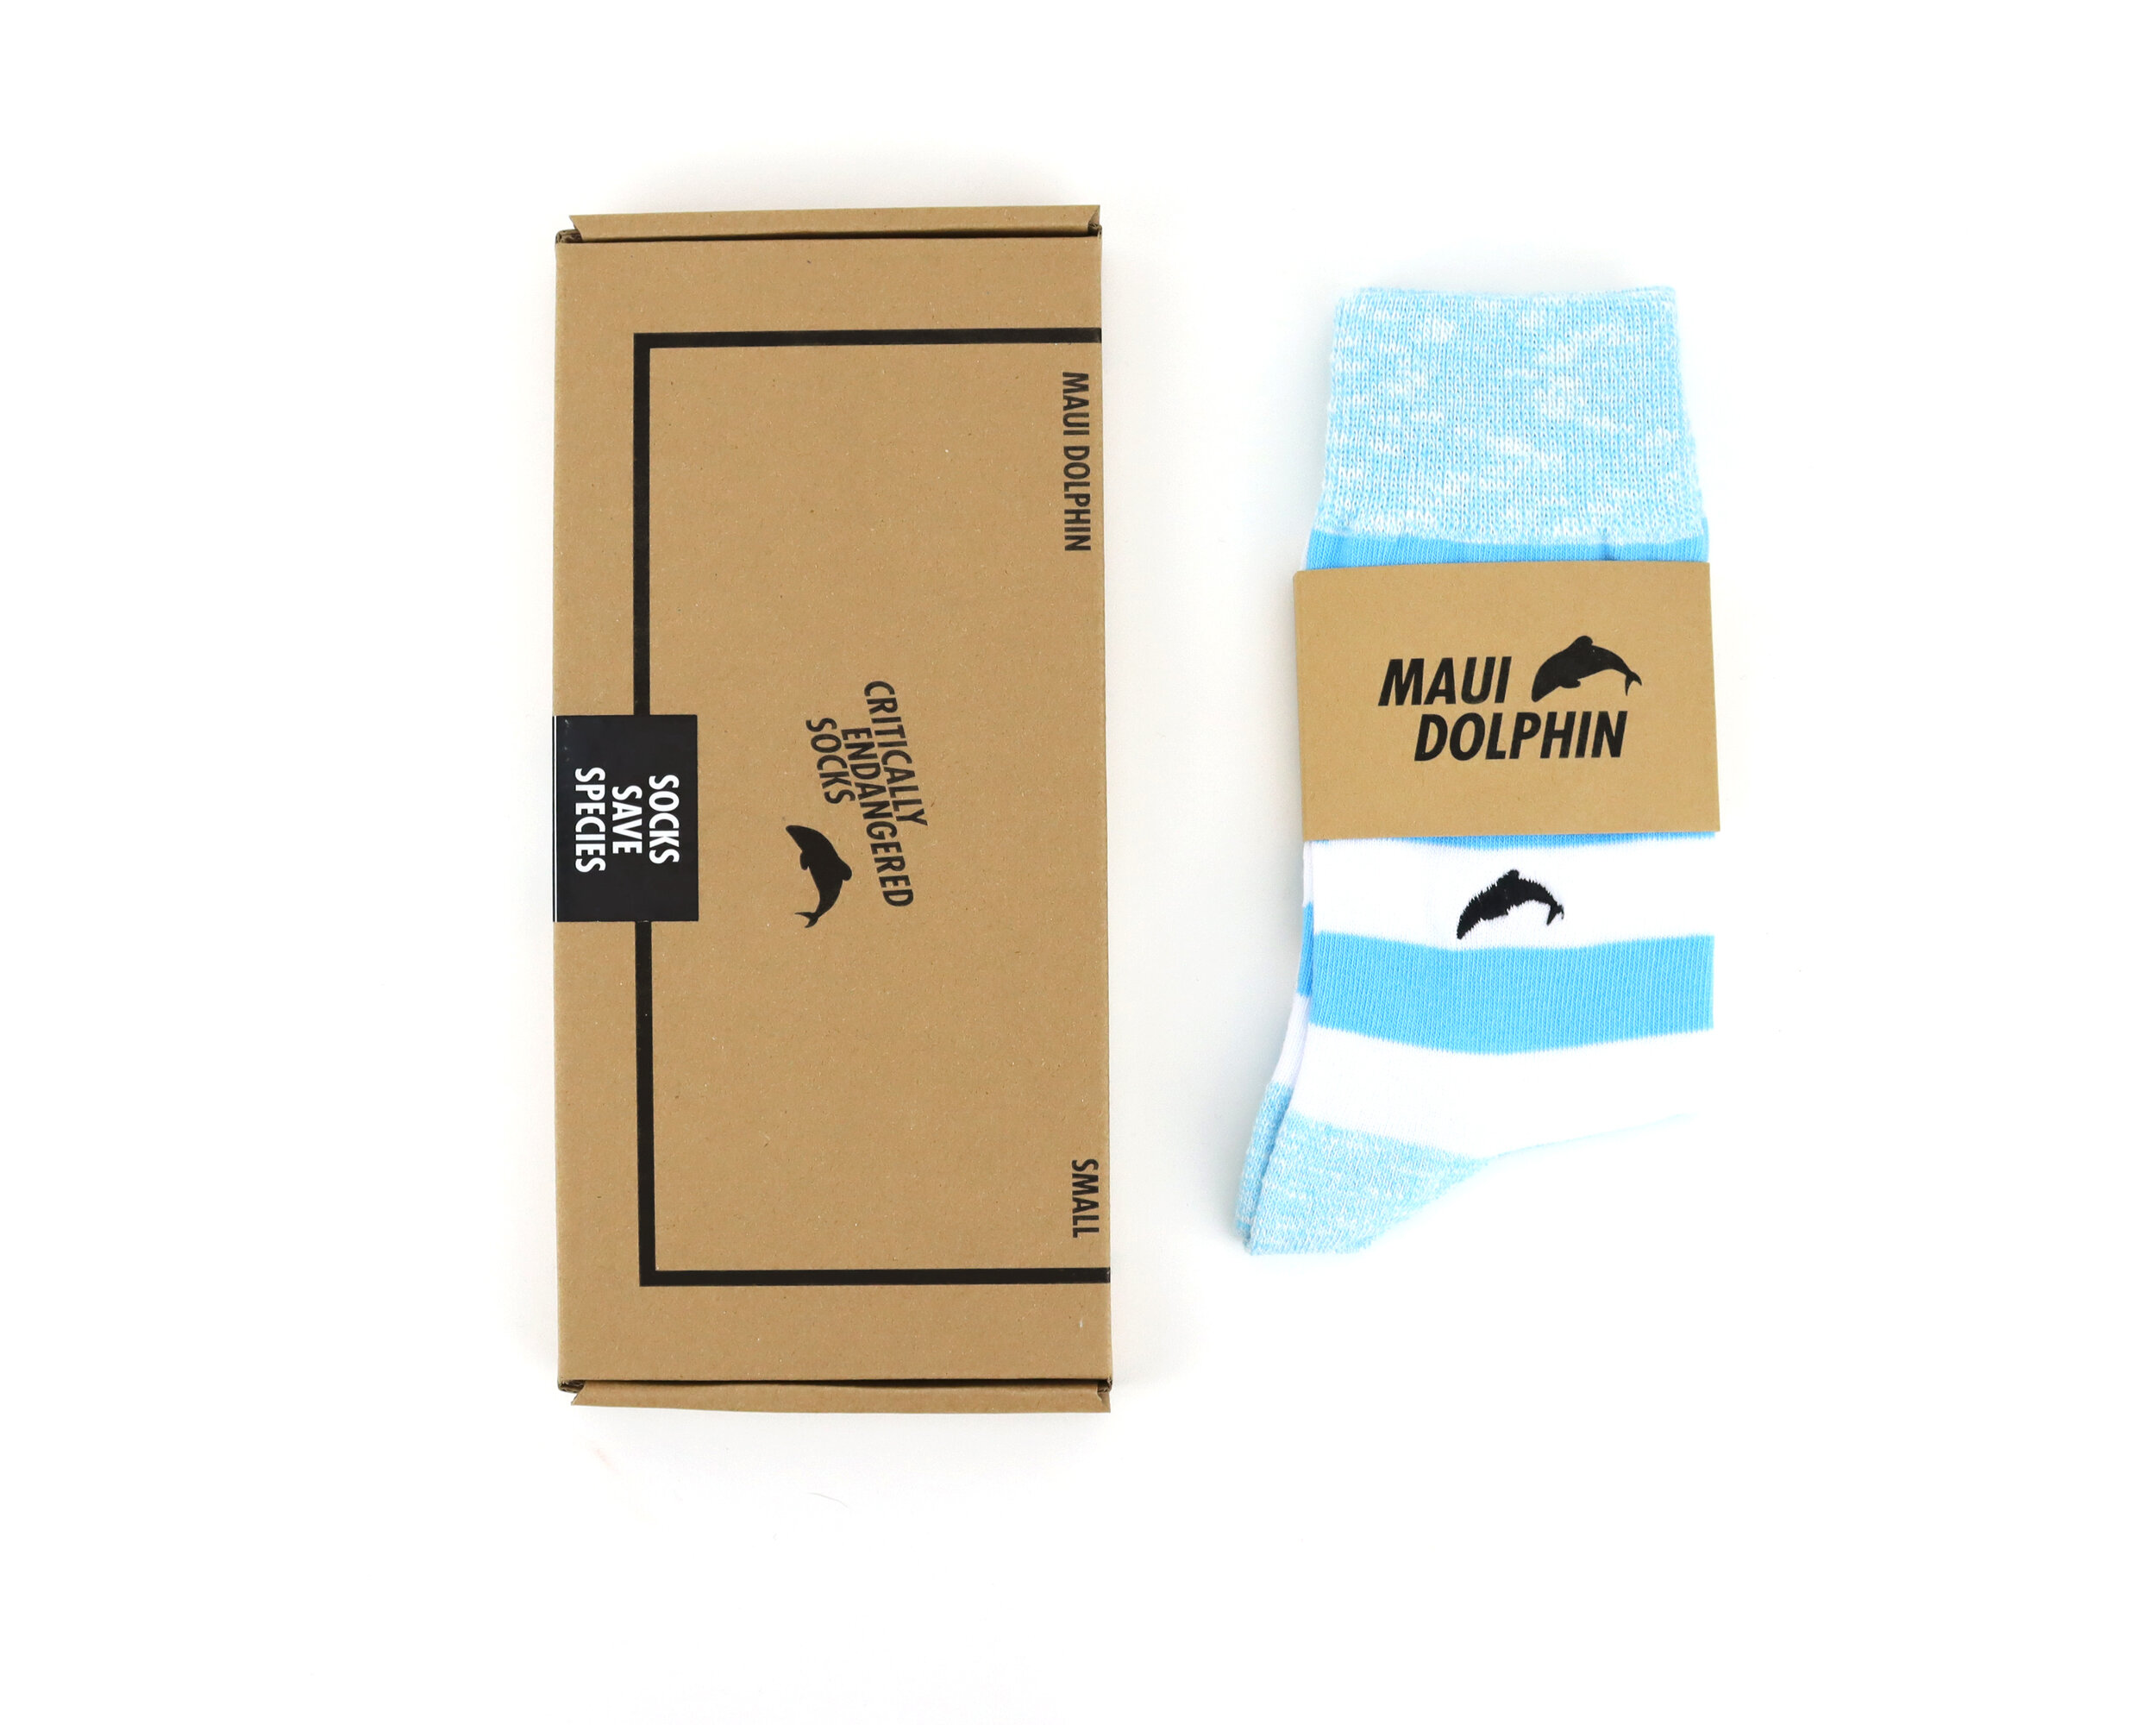 Dolphin socks and packaging.jpg